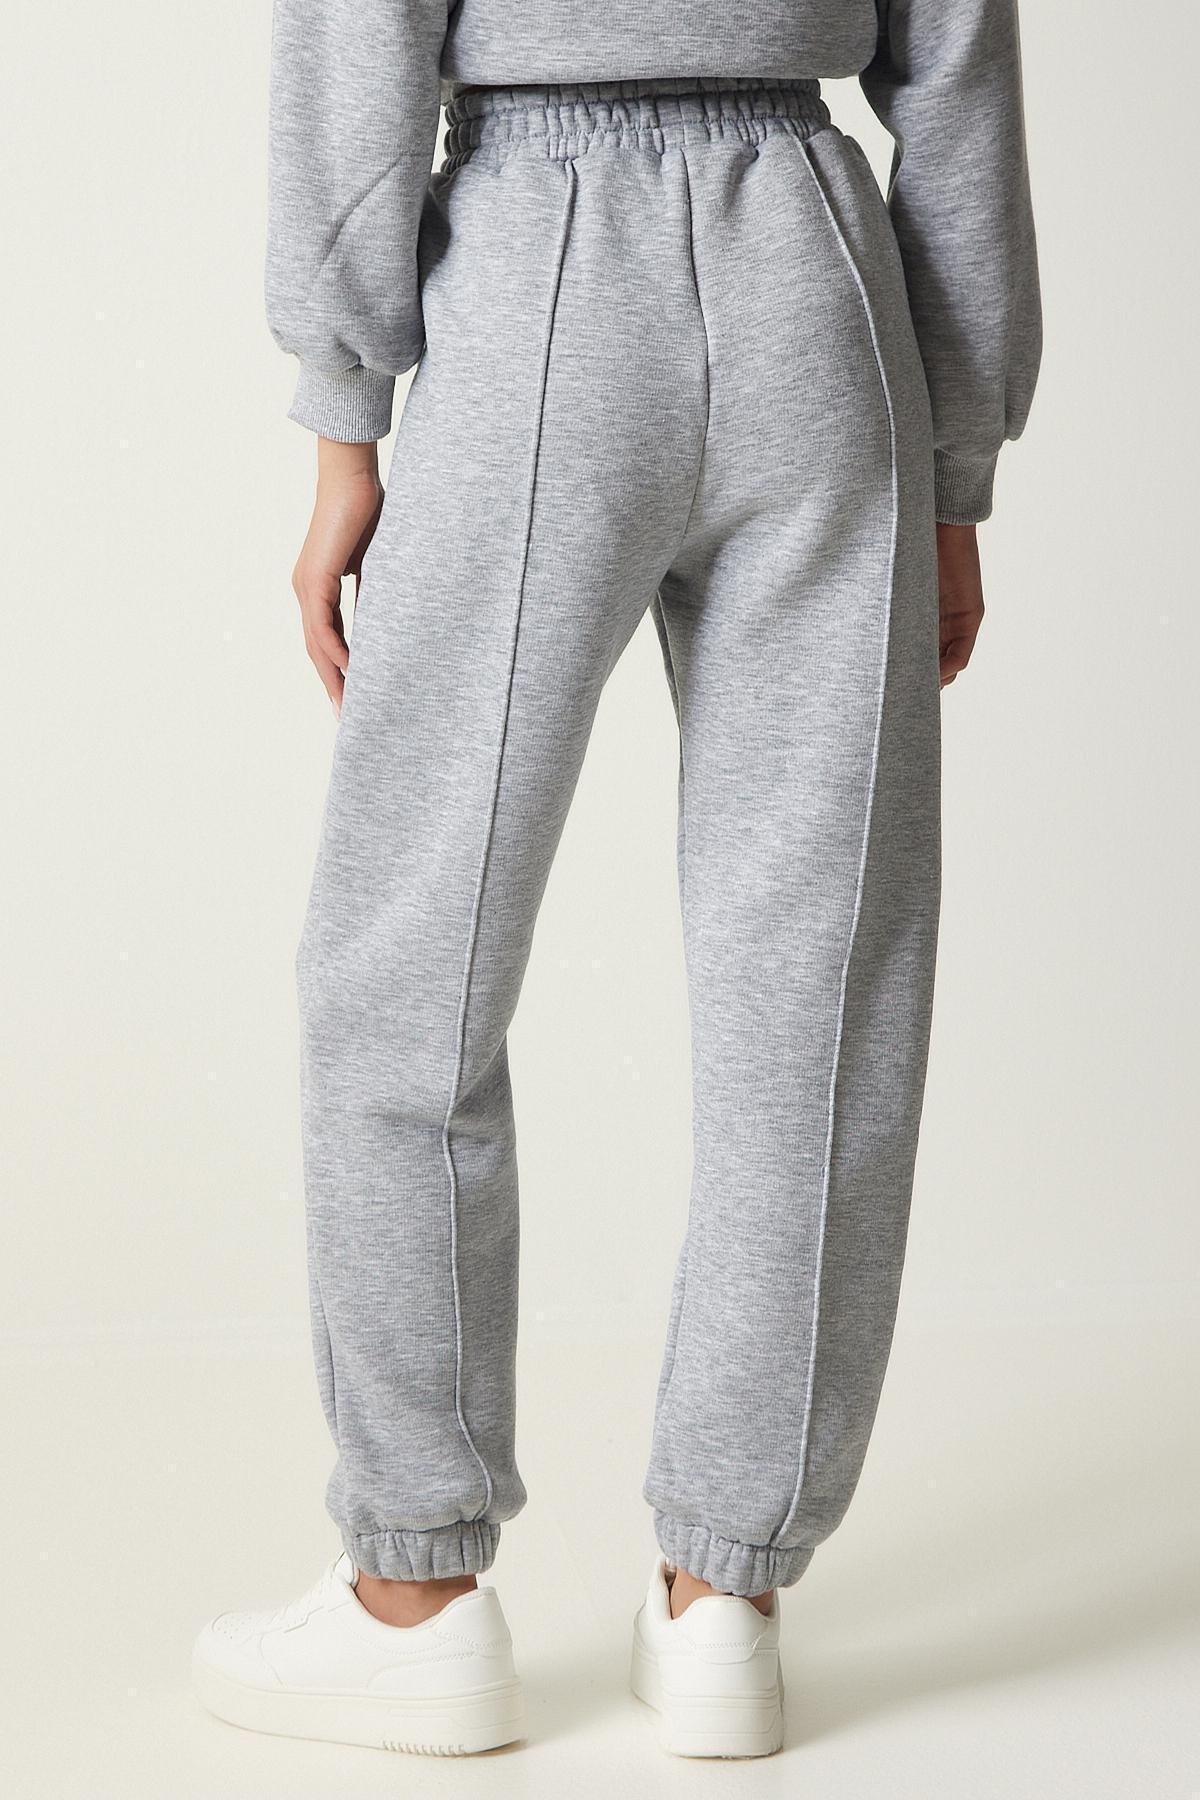 Happiness Istanbul - Grey Hooded Knitted Tracksuit, Set Of 2